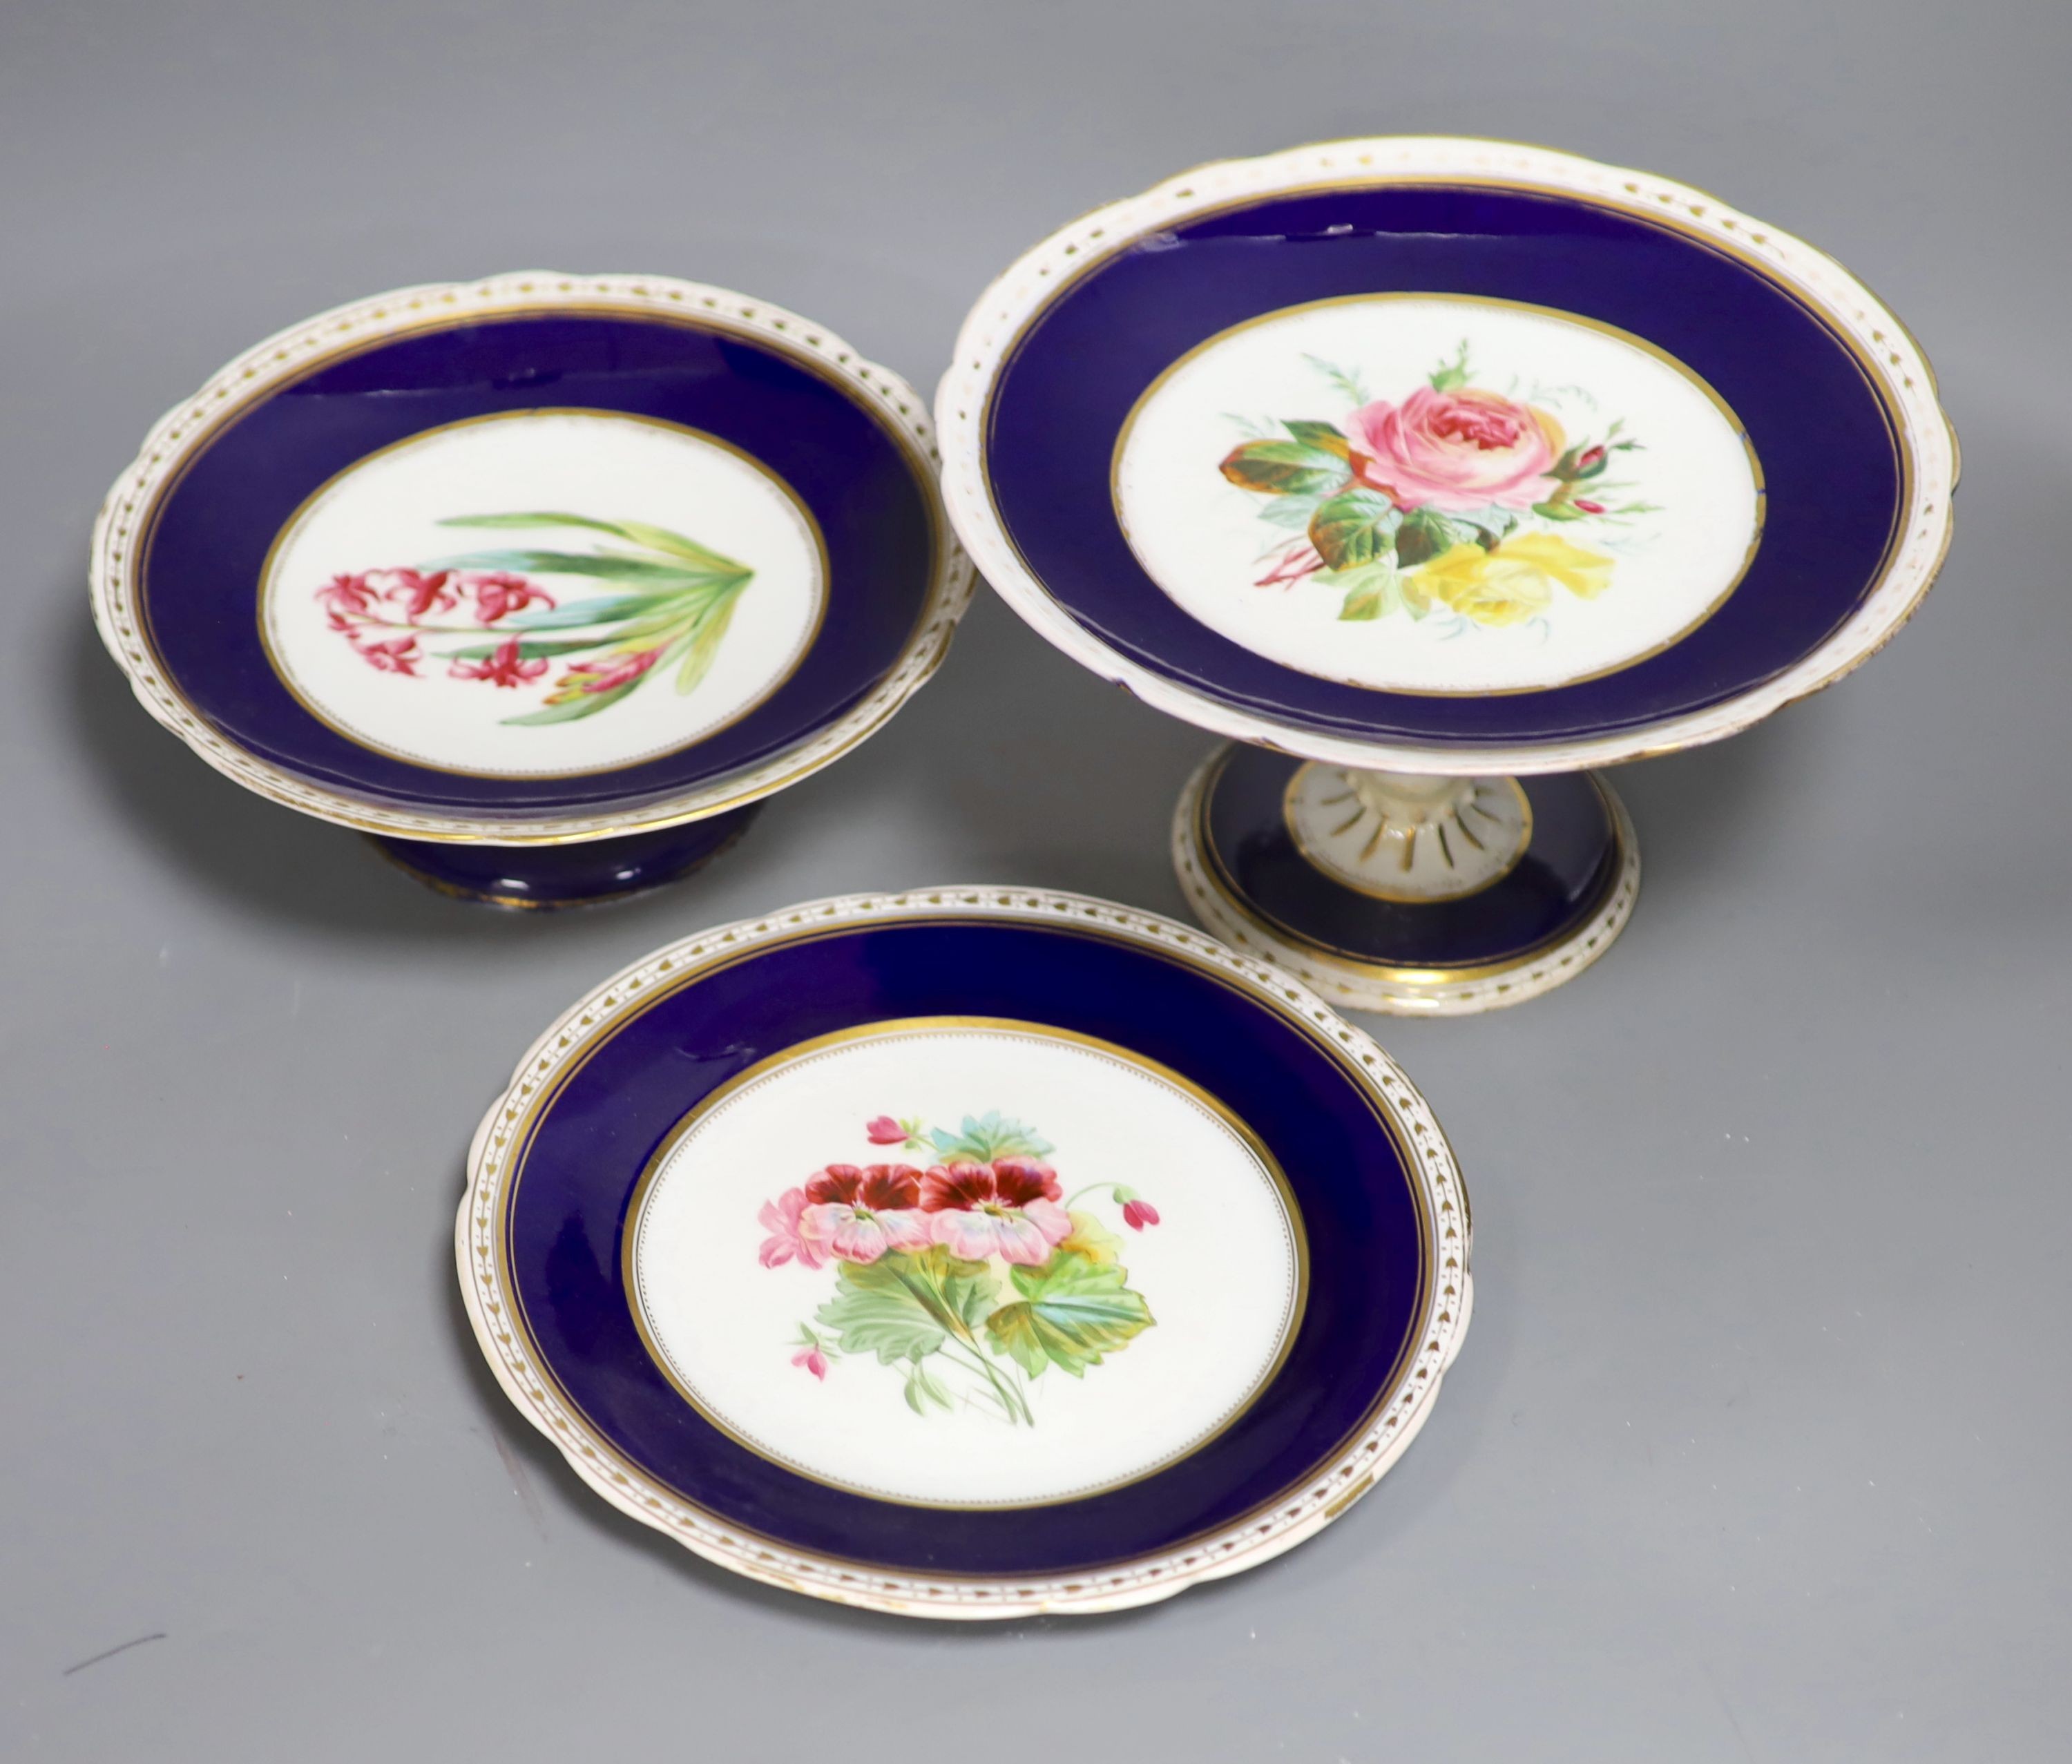 A Victorian porcelain flower painted dessert service, comprising eighteen plates and six cake stands